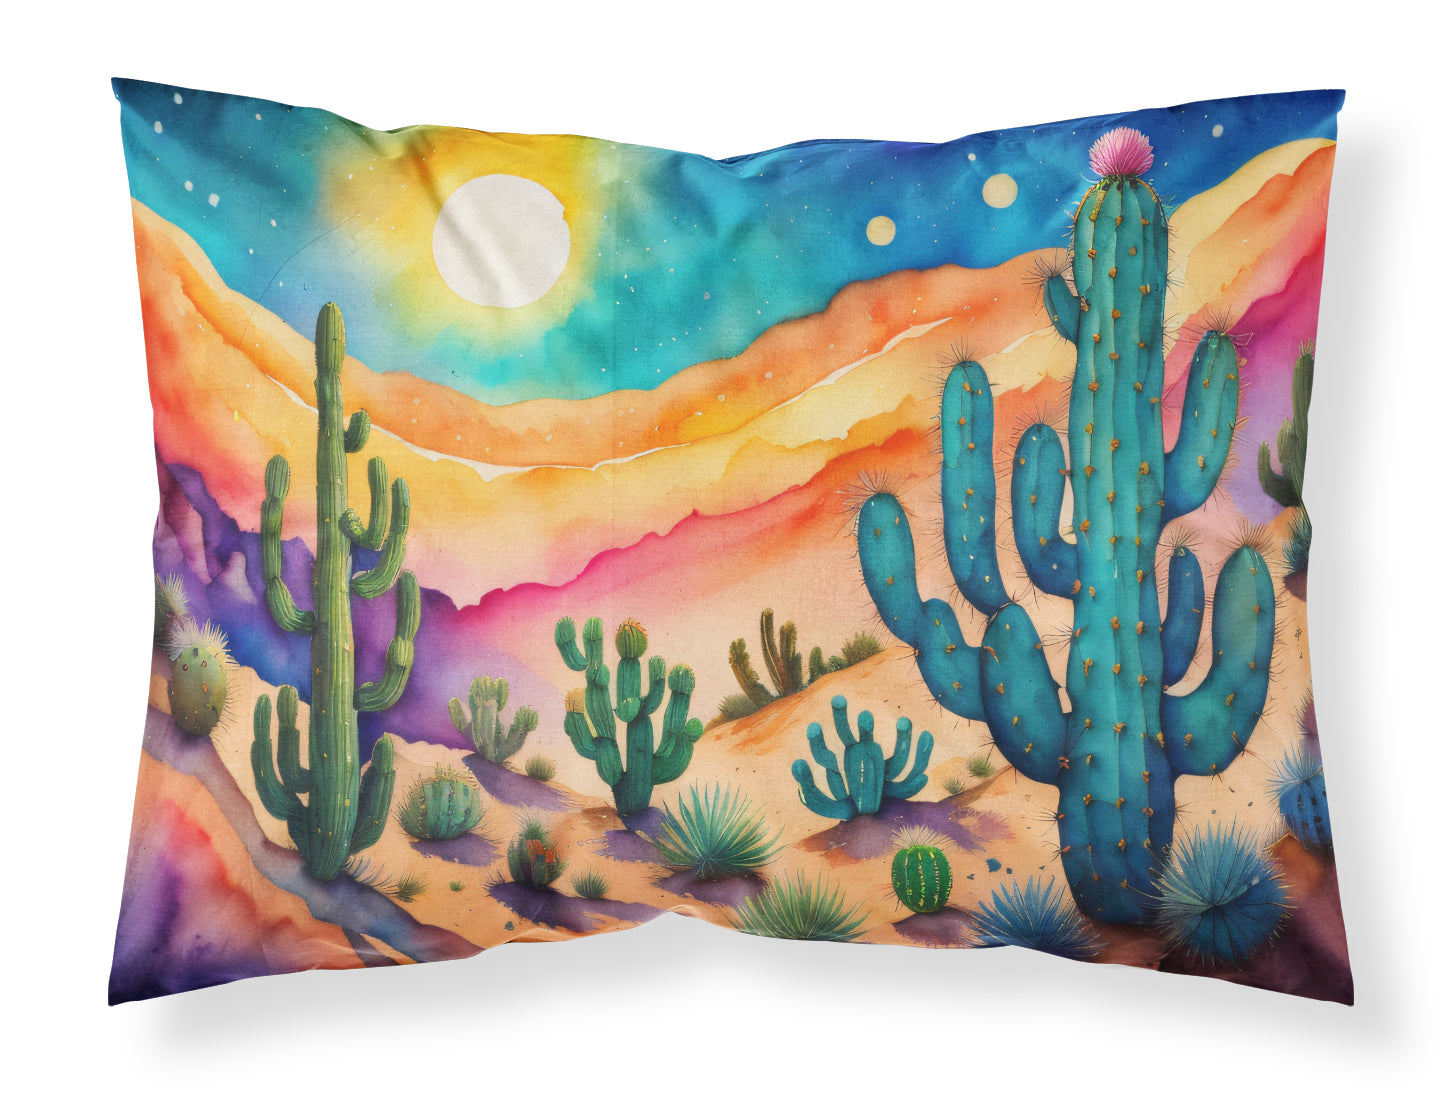 Buy this Cactus in Color Fabric Standard Pillowcase